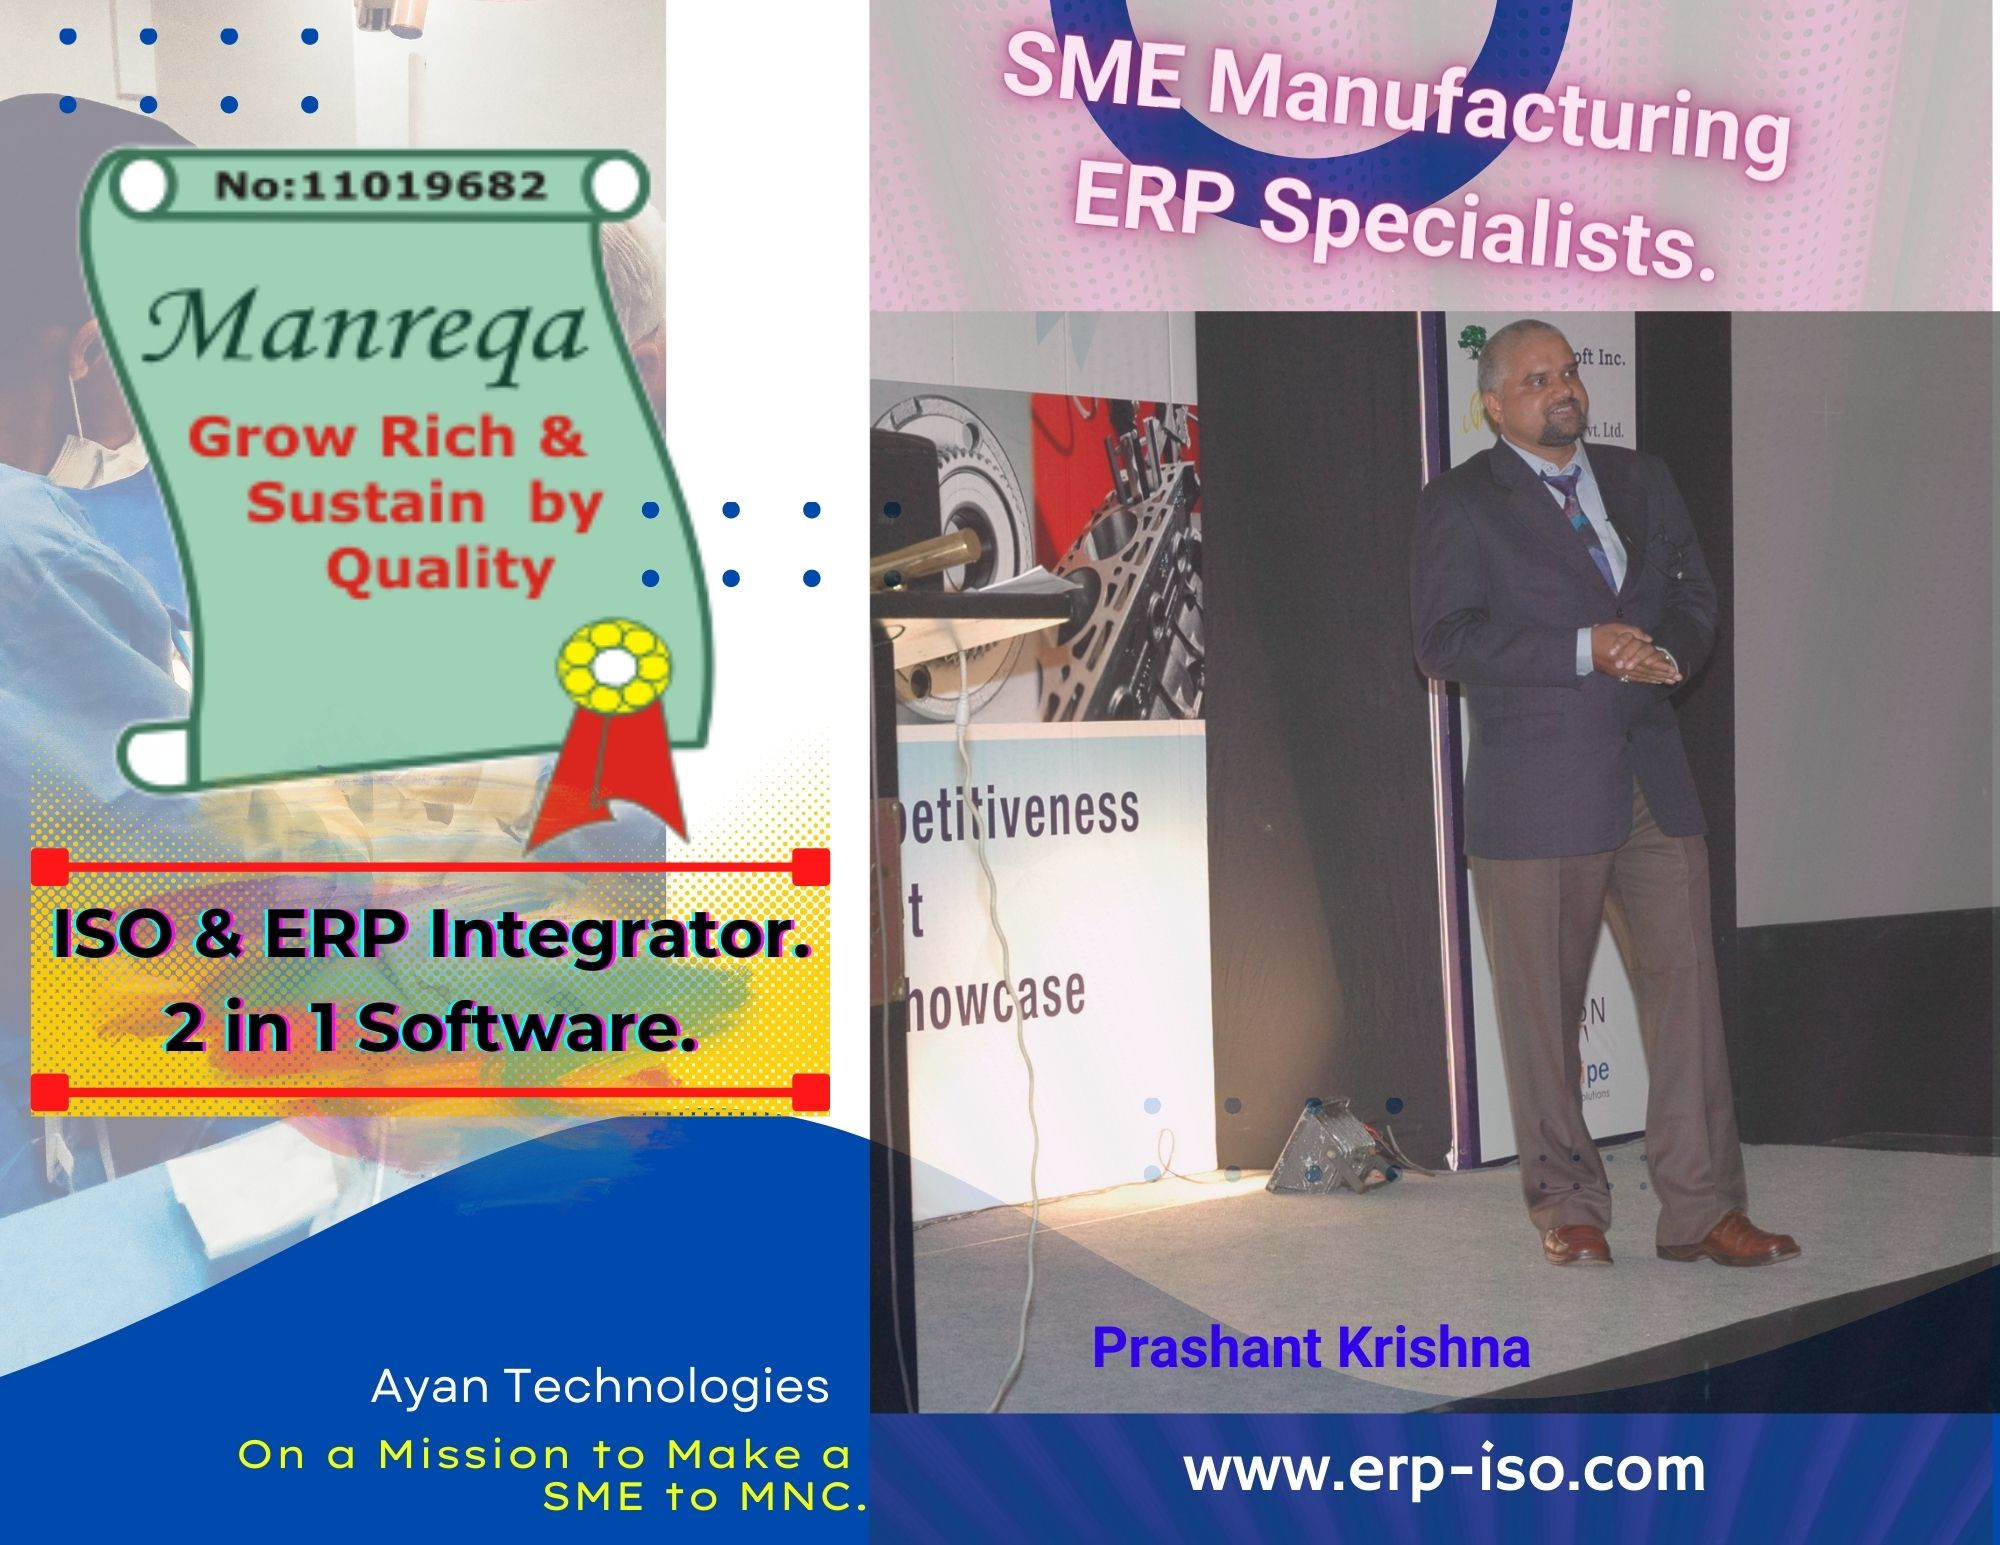 SME Manufacturing ERP Specialists.
Ayan Technologies 